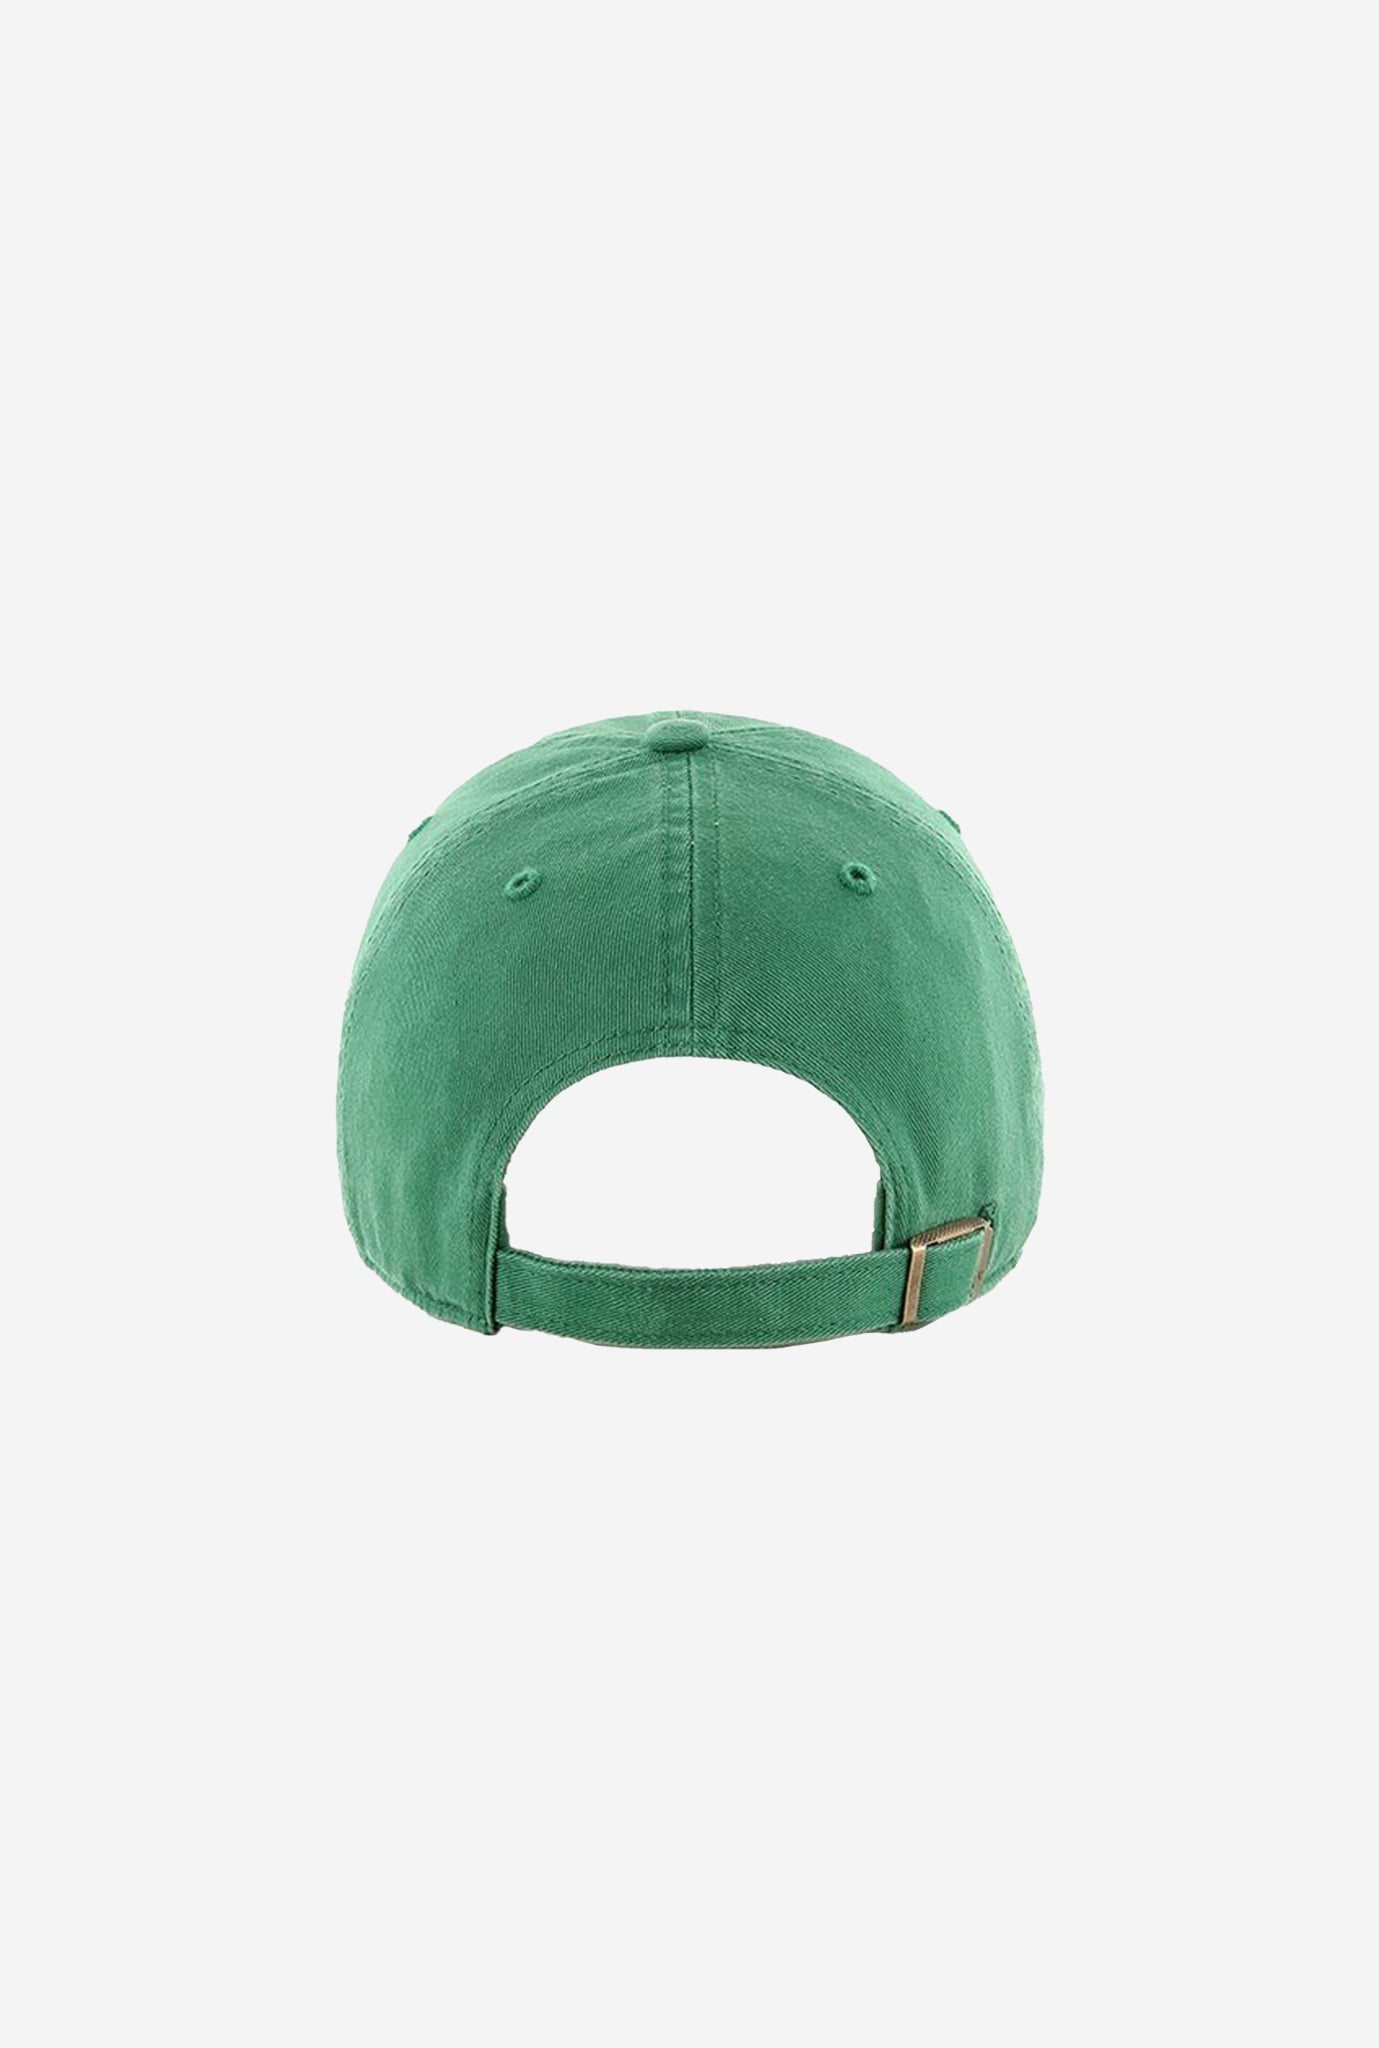 Oakland Athletics Cooperstown Clean Up Cap - Kelly Green